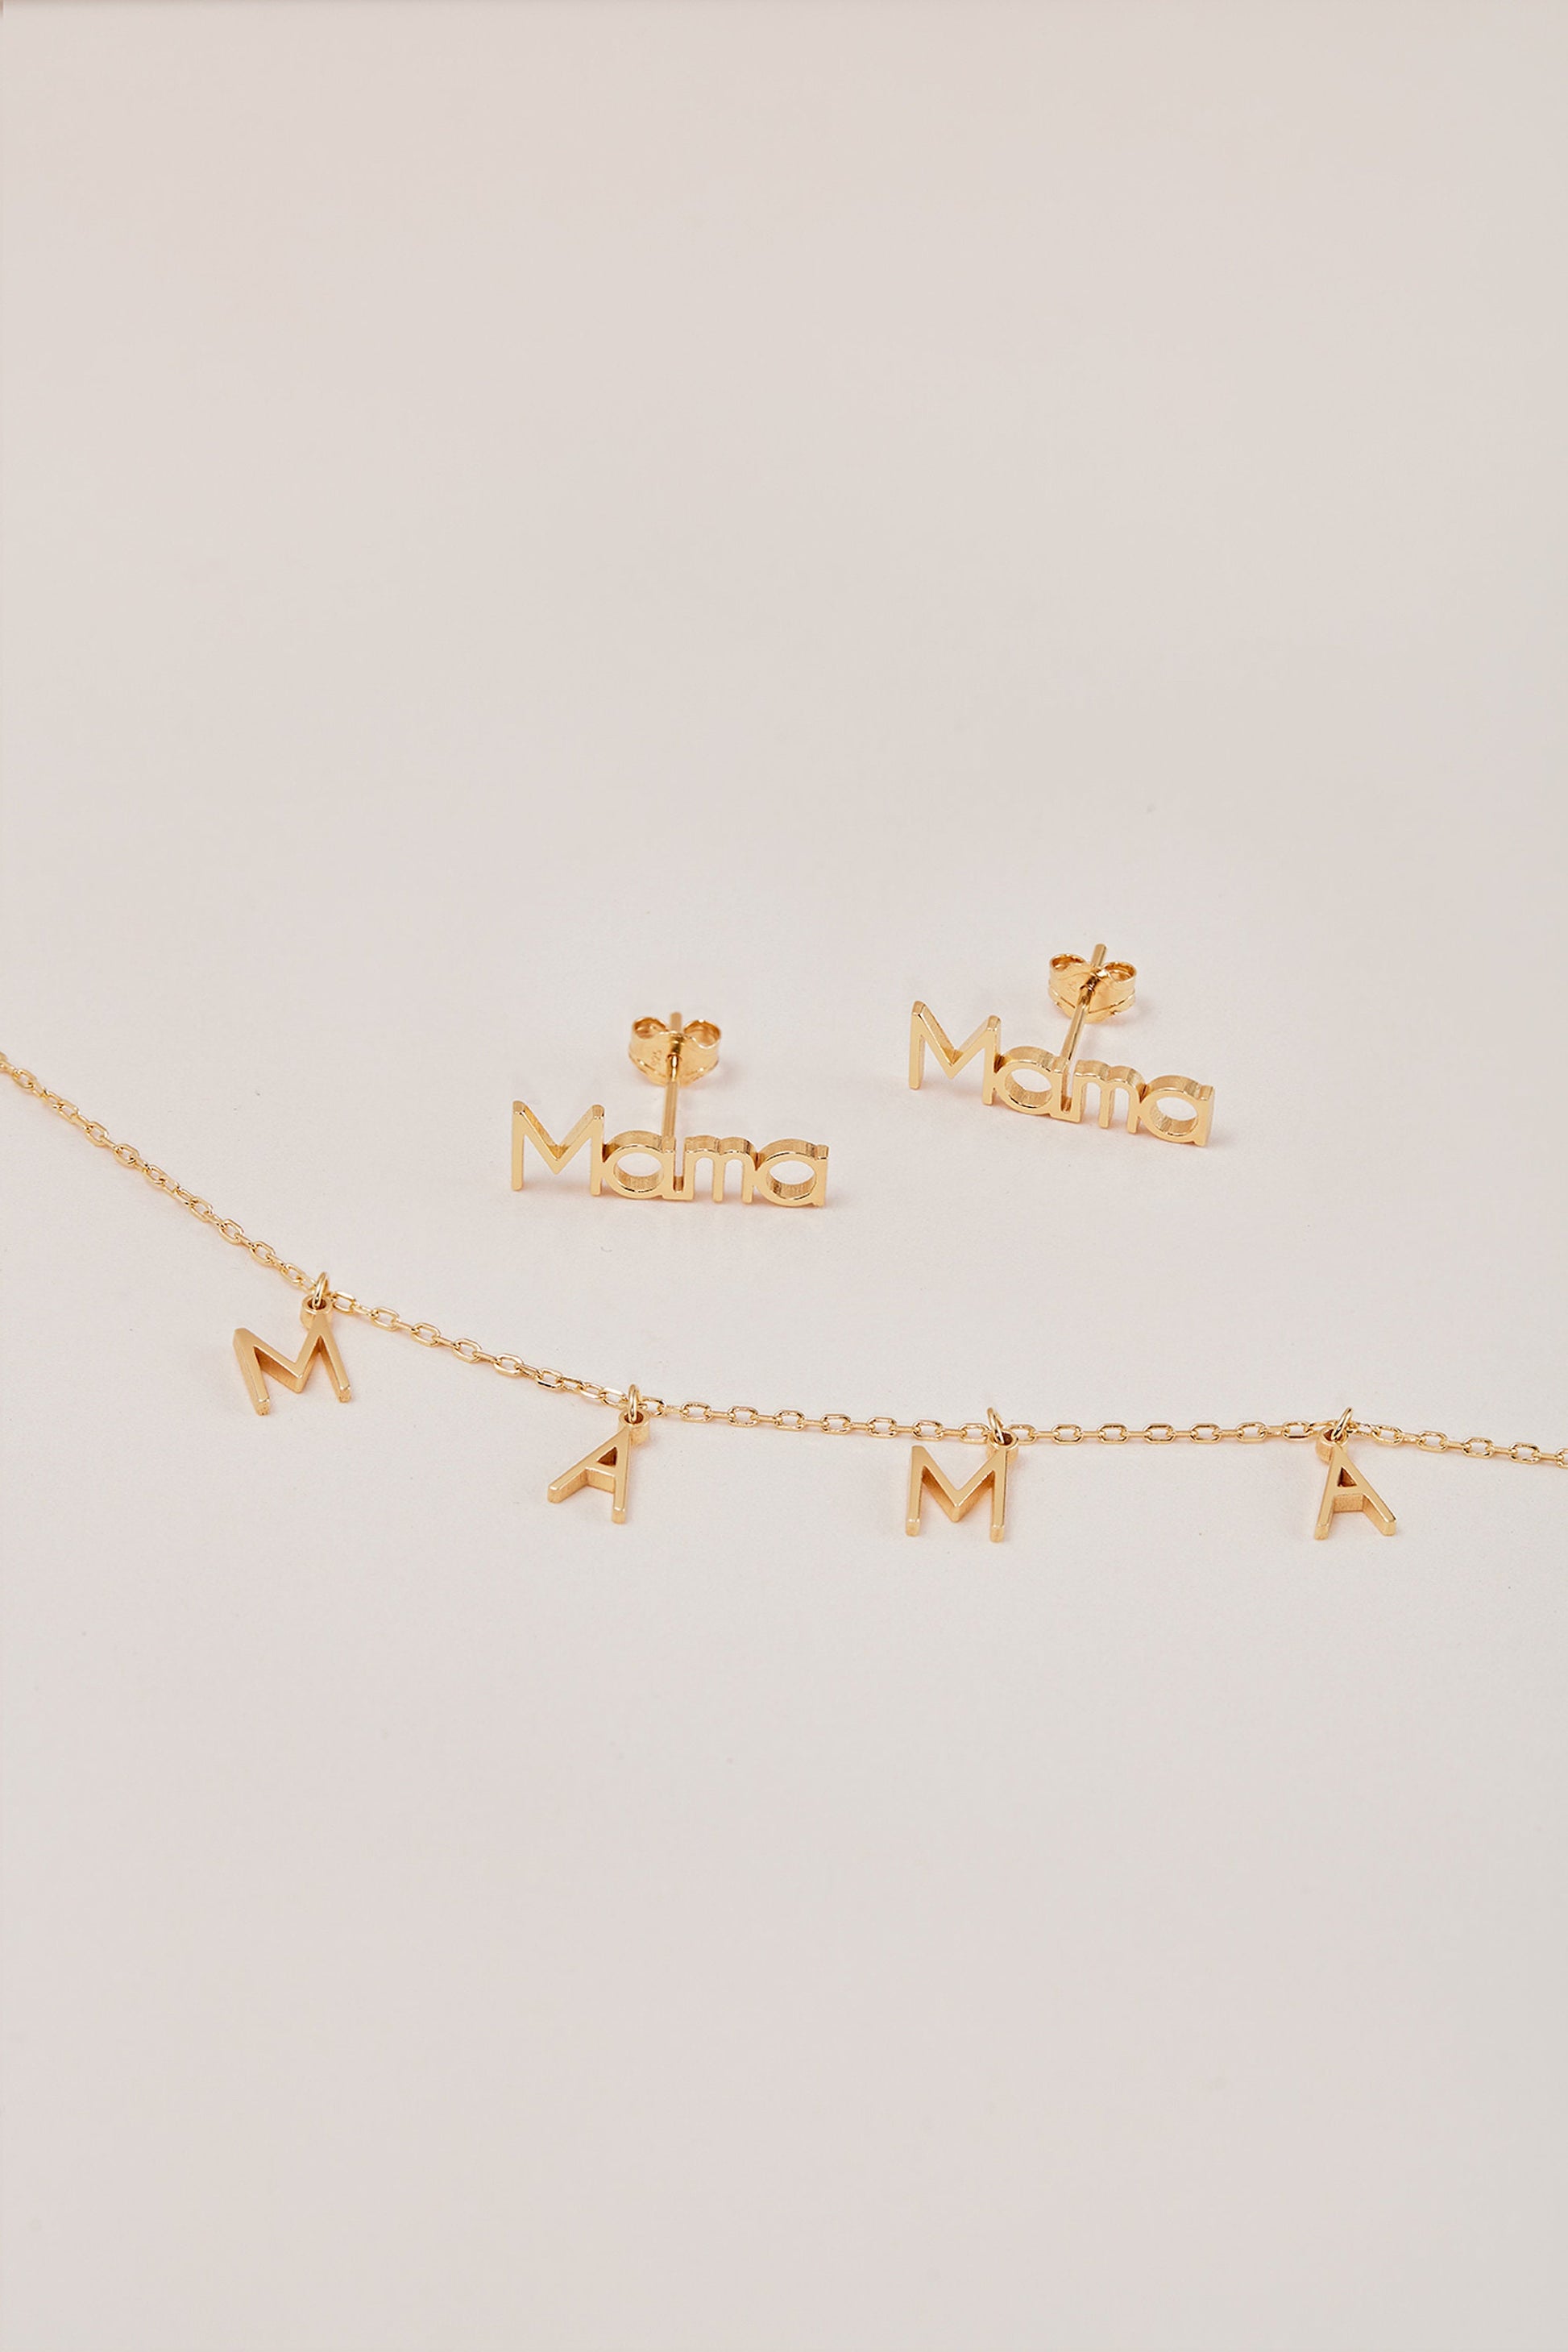 Ready To Ship | Mama Script  Earrings | Mother's Day Gift | New Mom Gift| Dainty Mama Earring| Gift For Mom | Baby Shower Gift